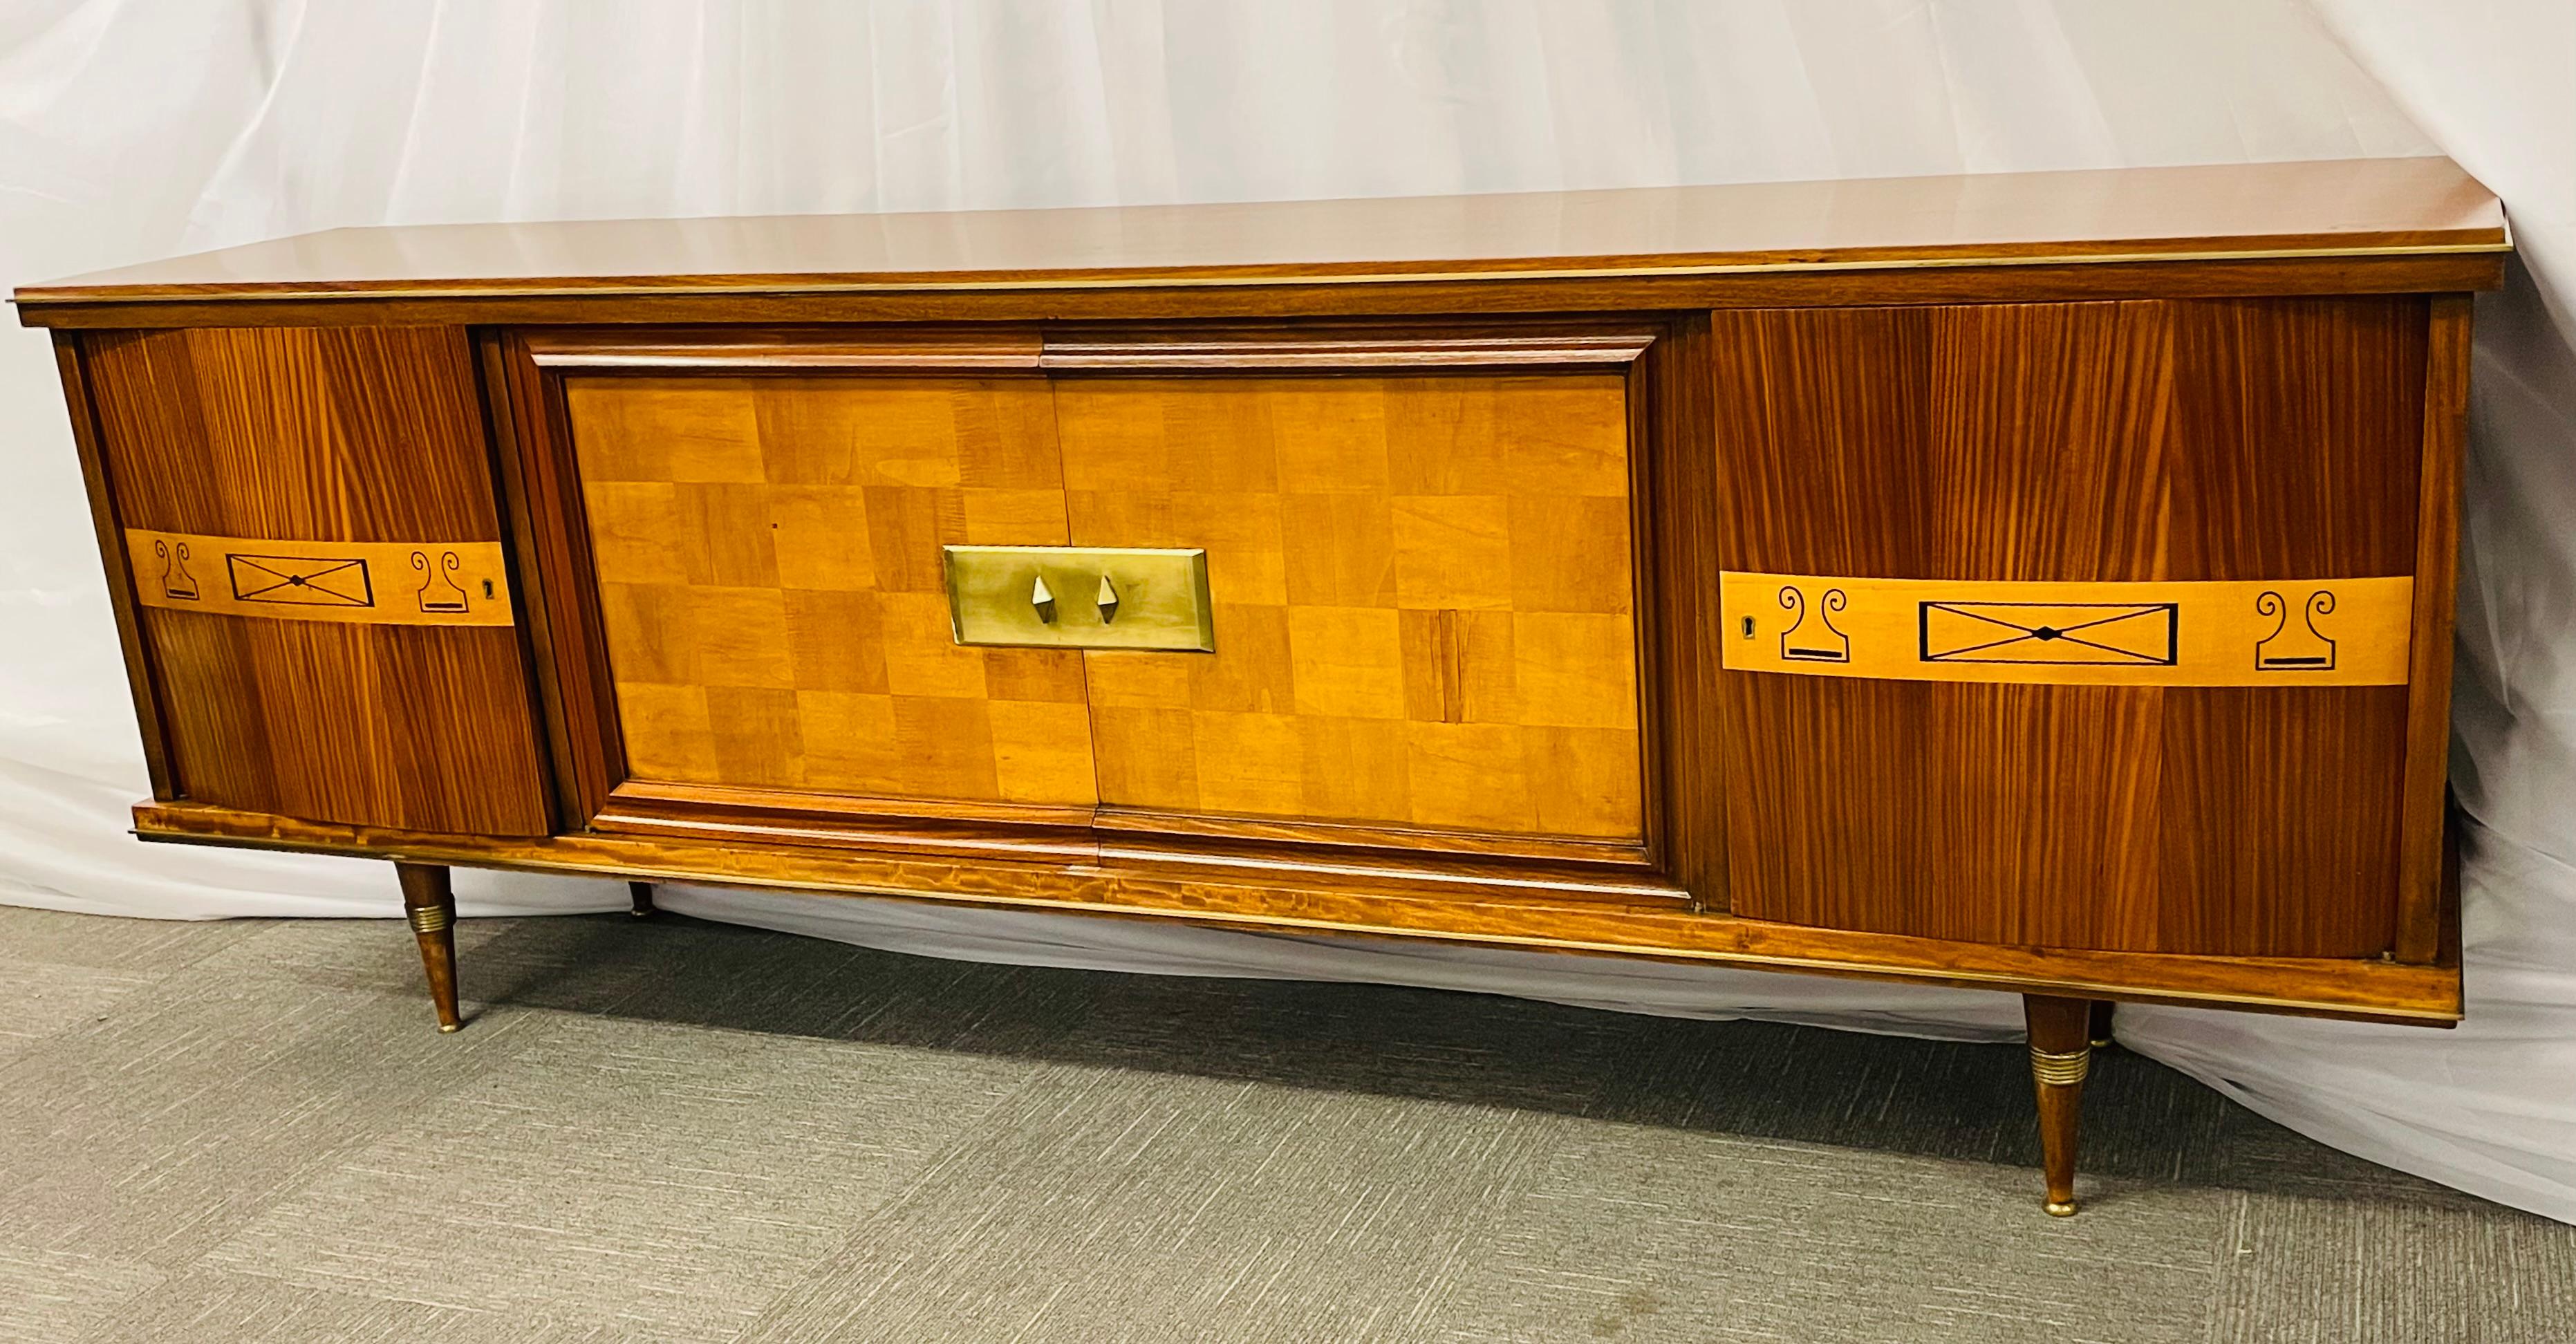 A French Art Deco Macassar sideboard. This large and impressive sideboard server cabinet has bronze mounts on the top and bottom as well as bronze double leg caps. The interior fully fitted with shelves on the right had side and fitted silverware